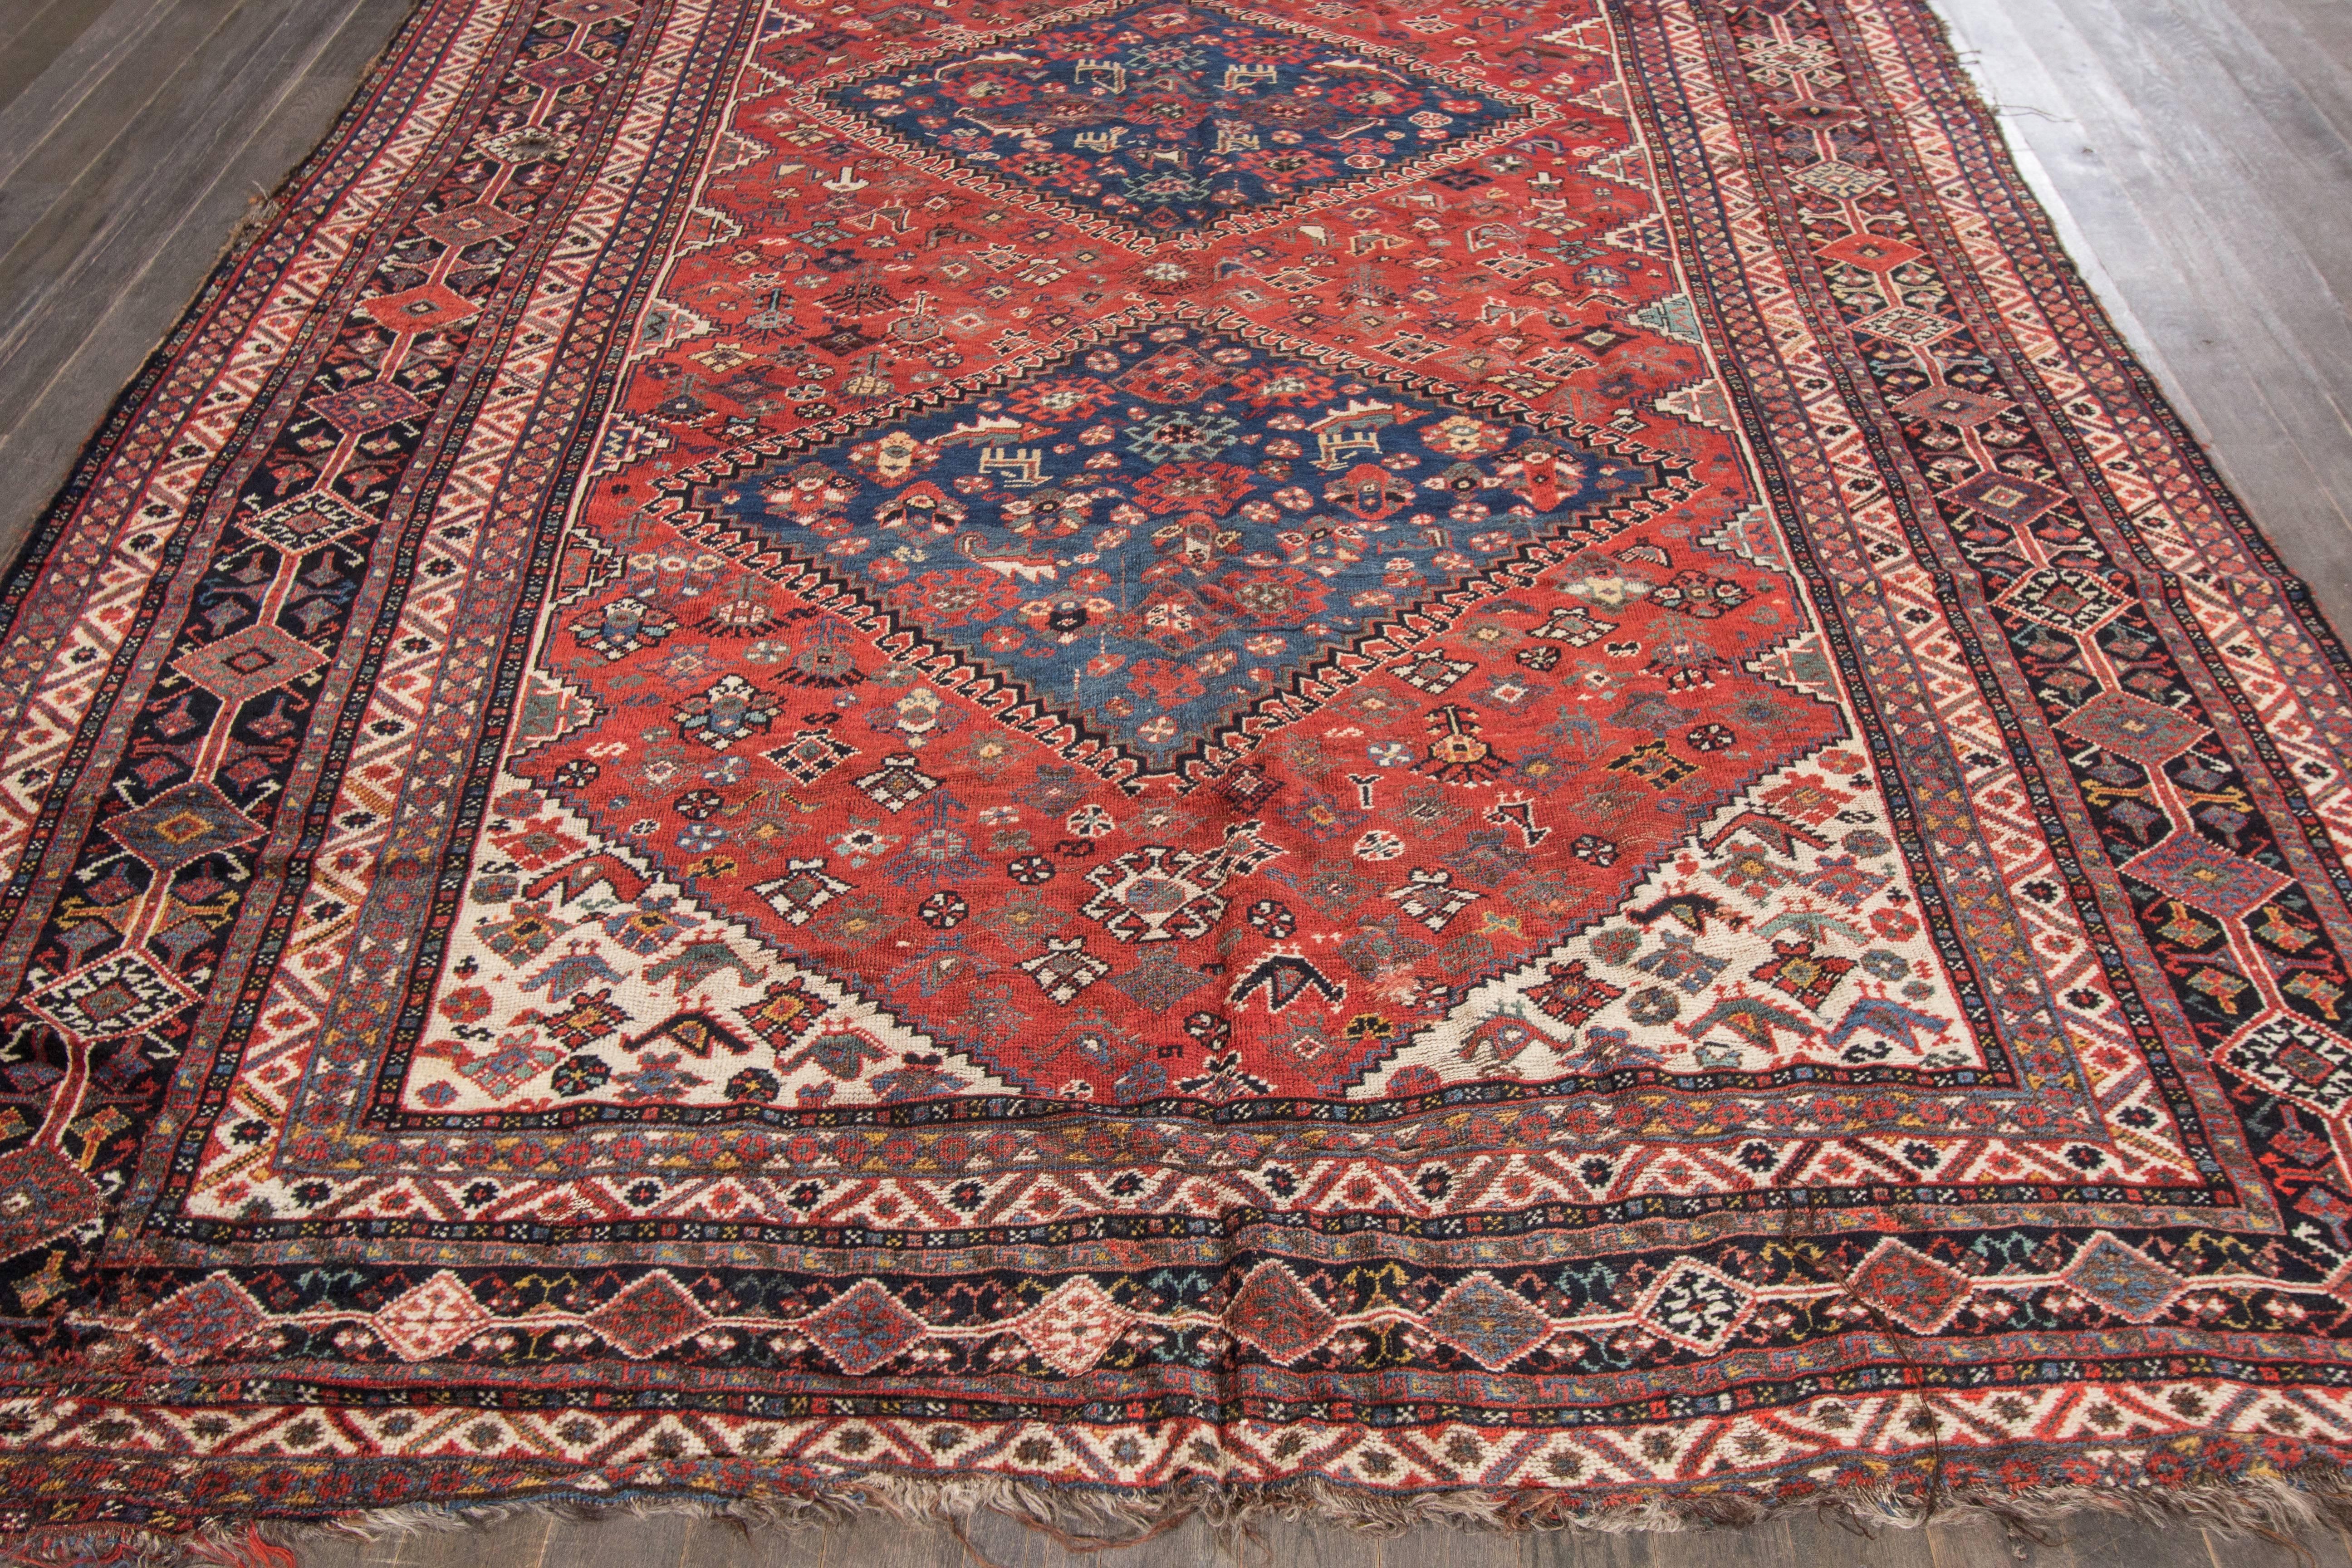 Beautifully Designed Antique Distressed Shiraz Rug In Good Condition For Sale In Norwalk, CT